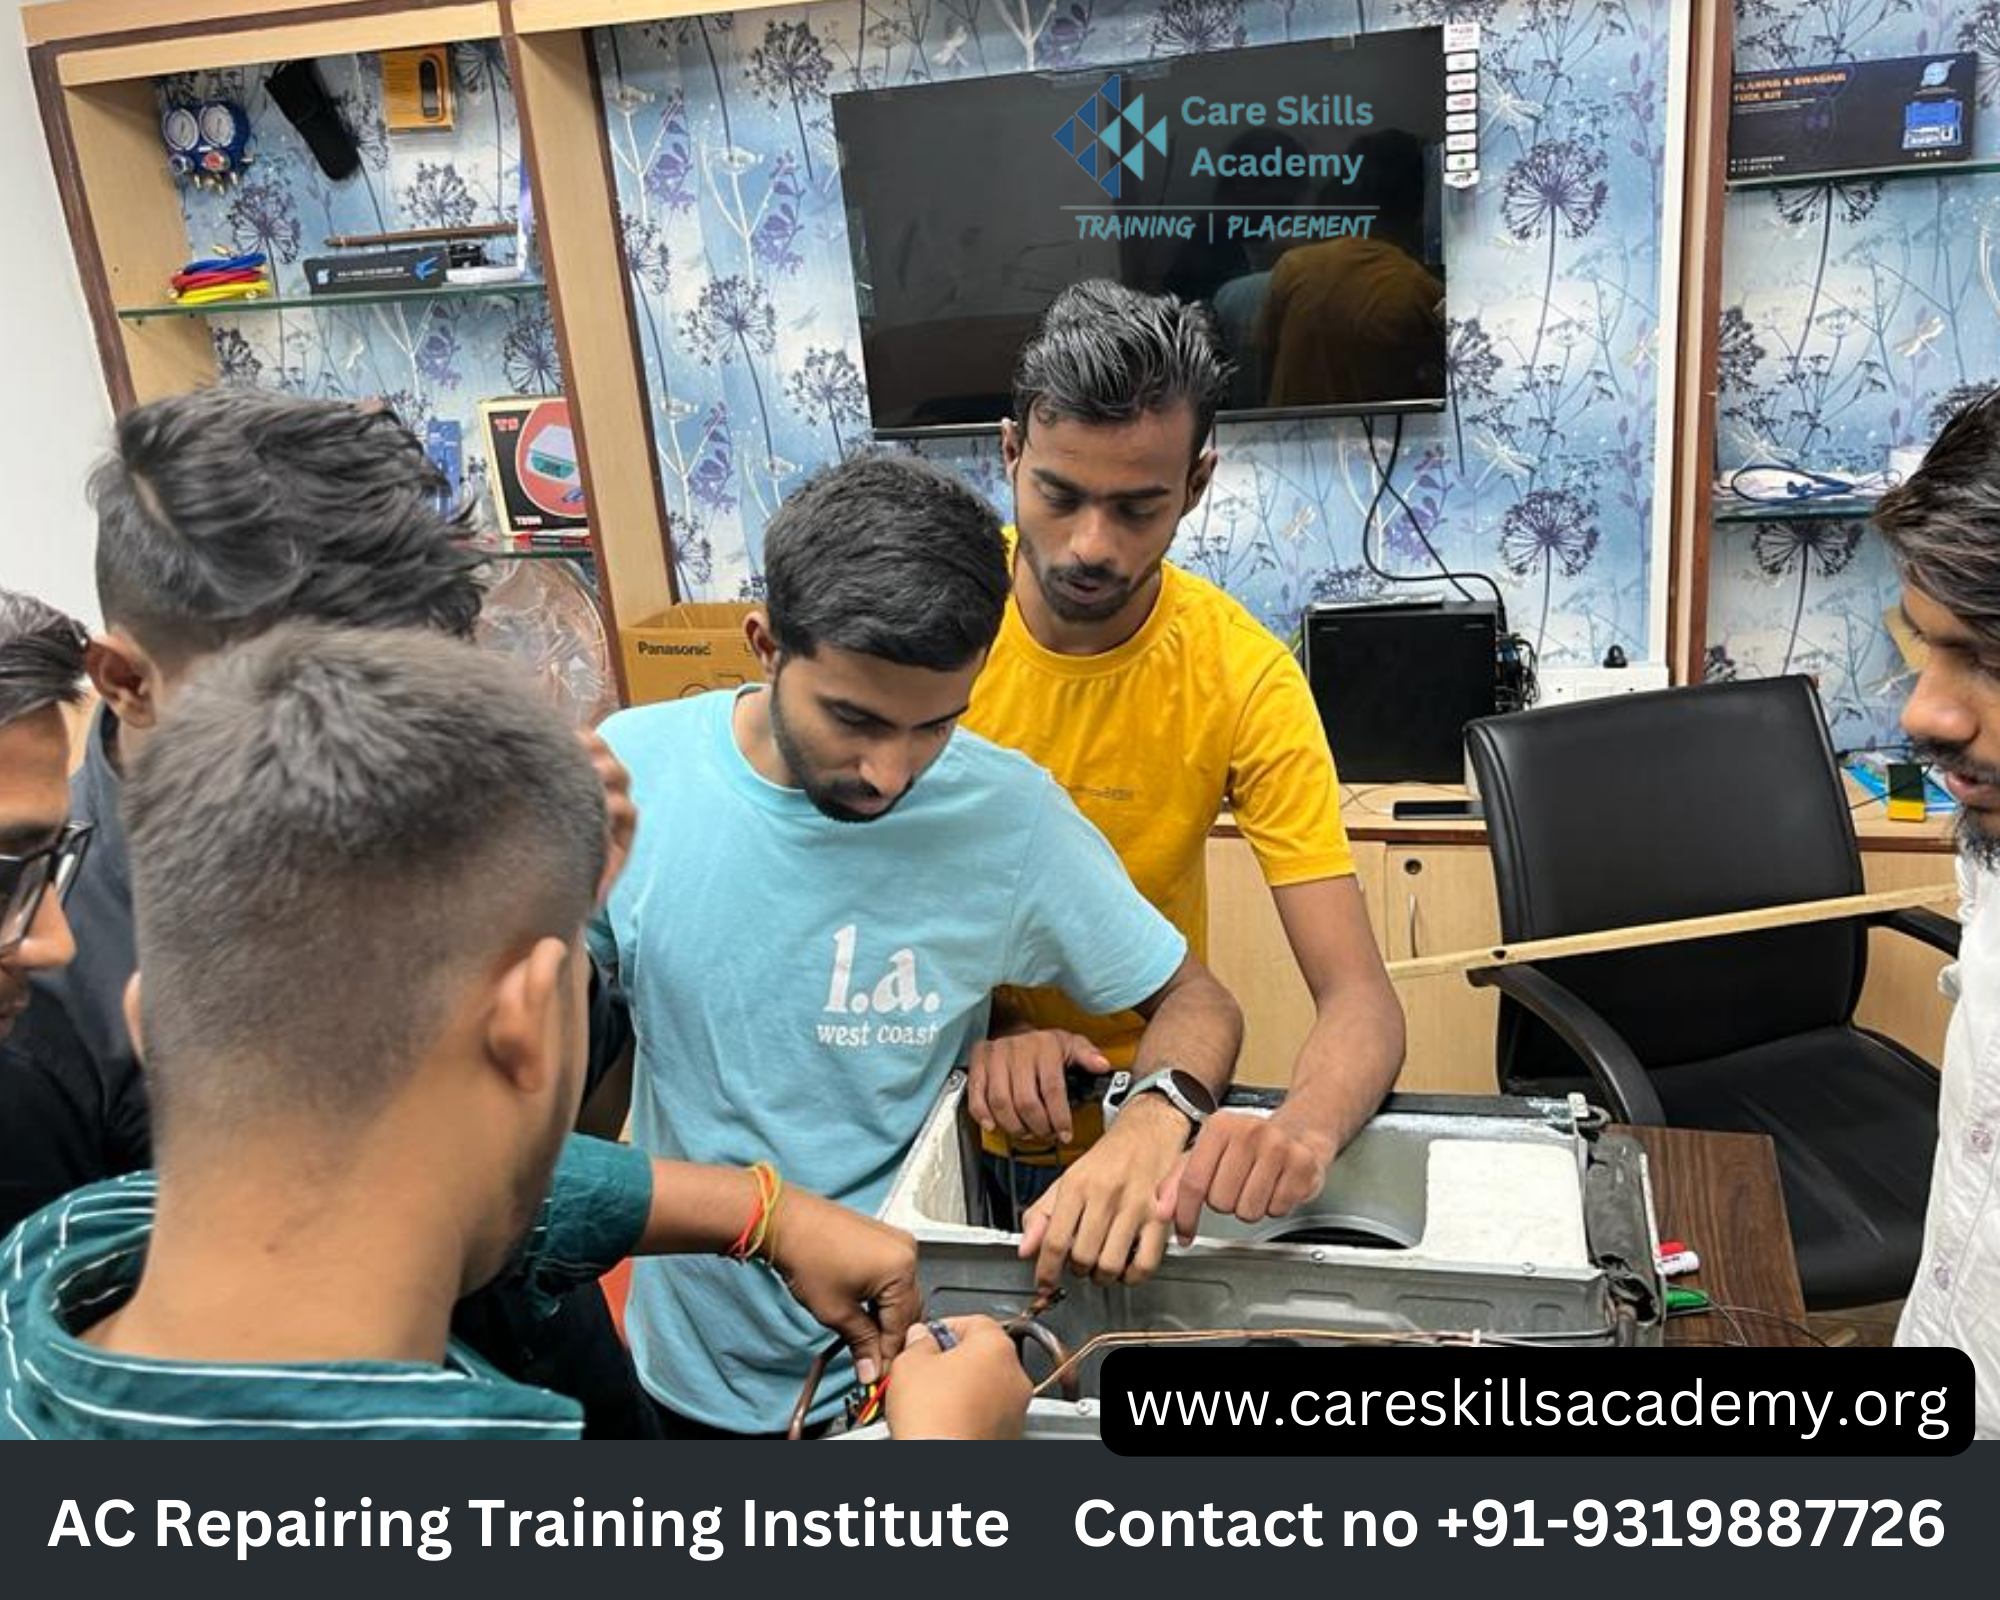 Best AC Repairing Course Training Institute in Noida: Join Care Skills Academy Today!